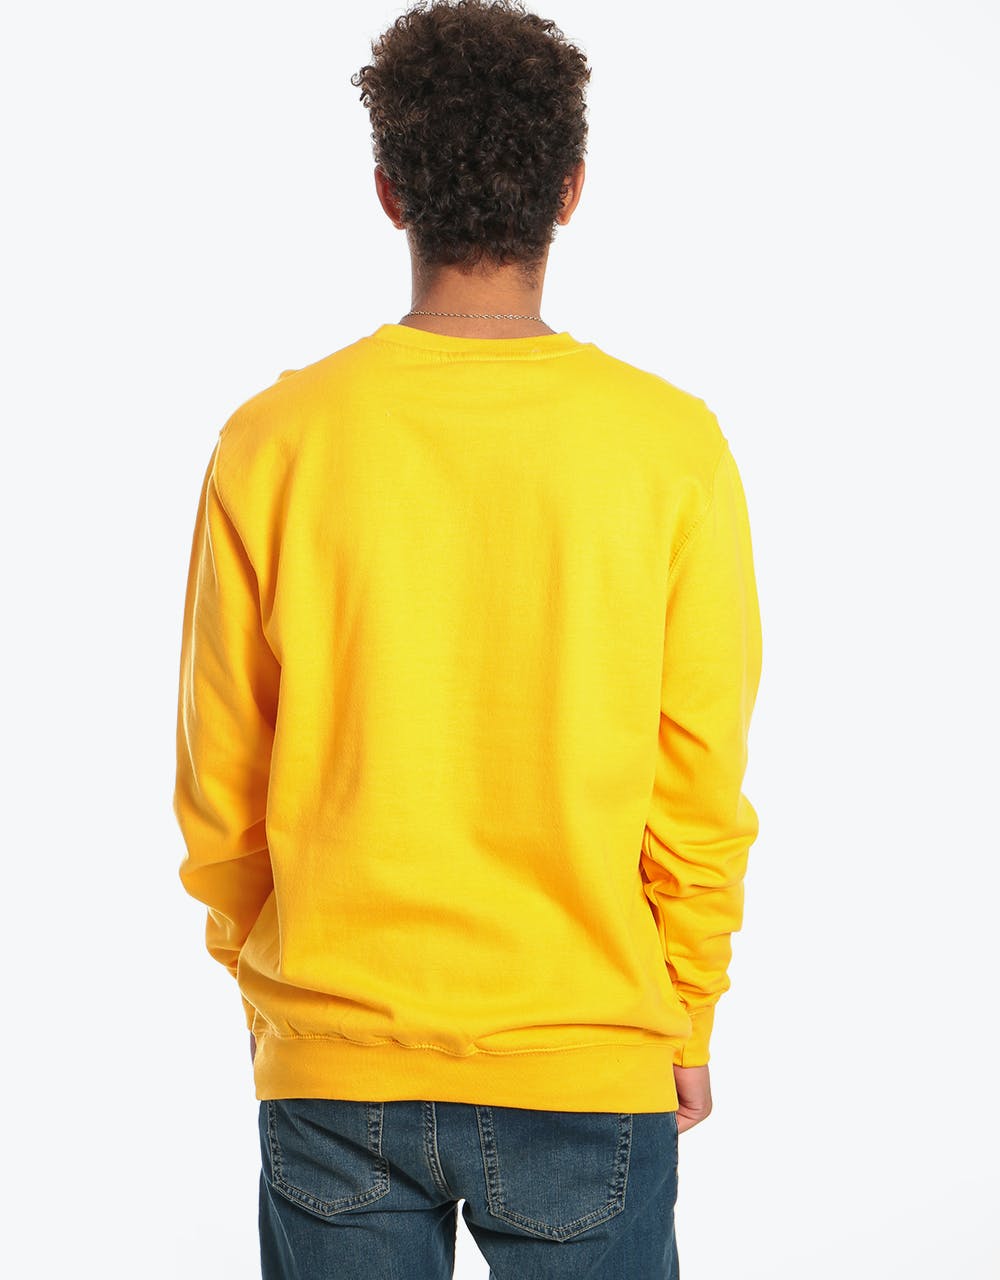 Route One Registered Sweatshirt - Gold